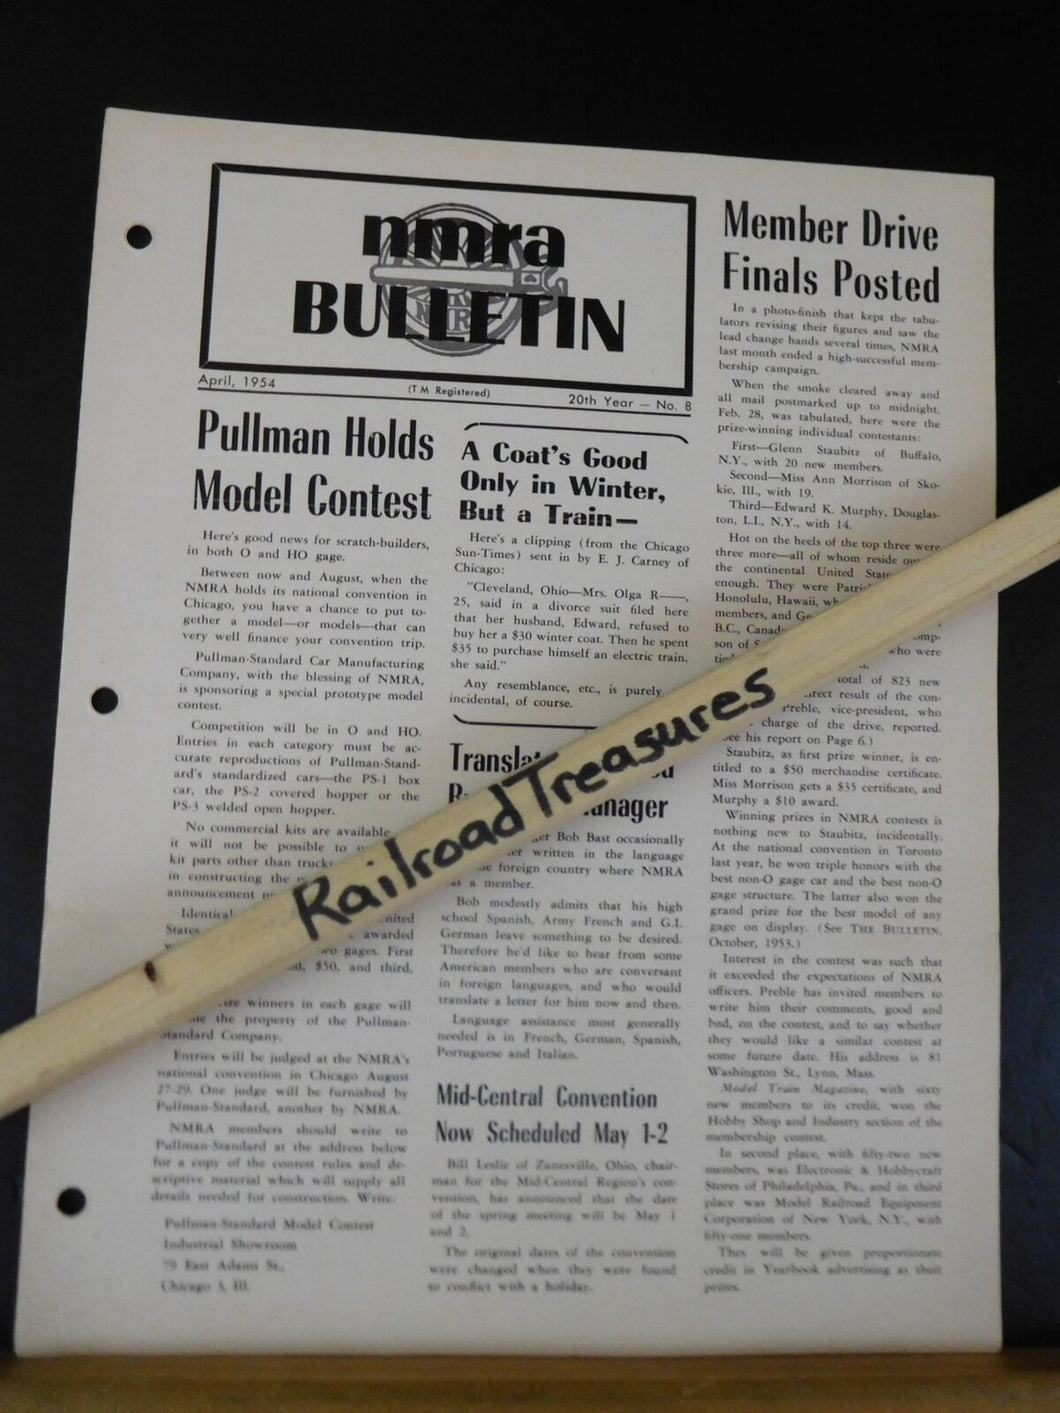 NMRA Bulletin 1954 April #8 of 20th Year A Coat’s Good Only in Winter, But a Tra